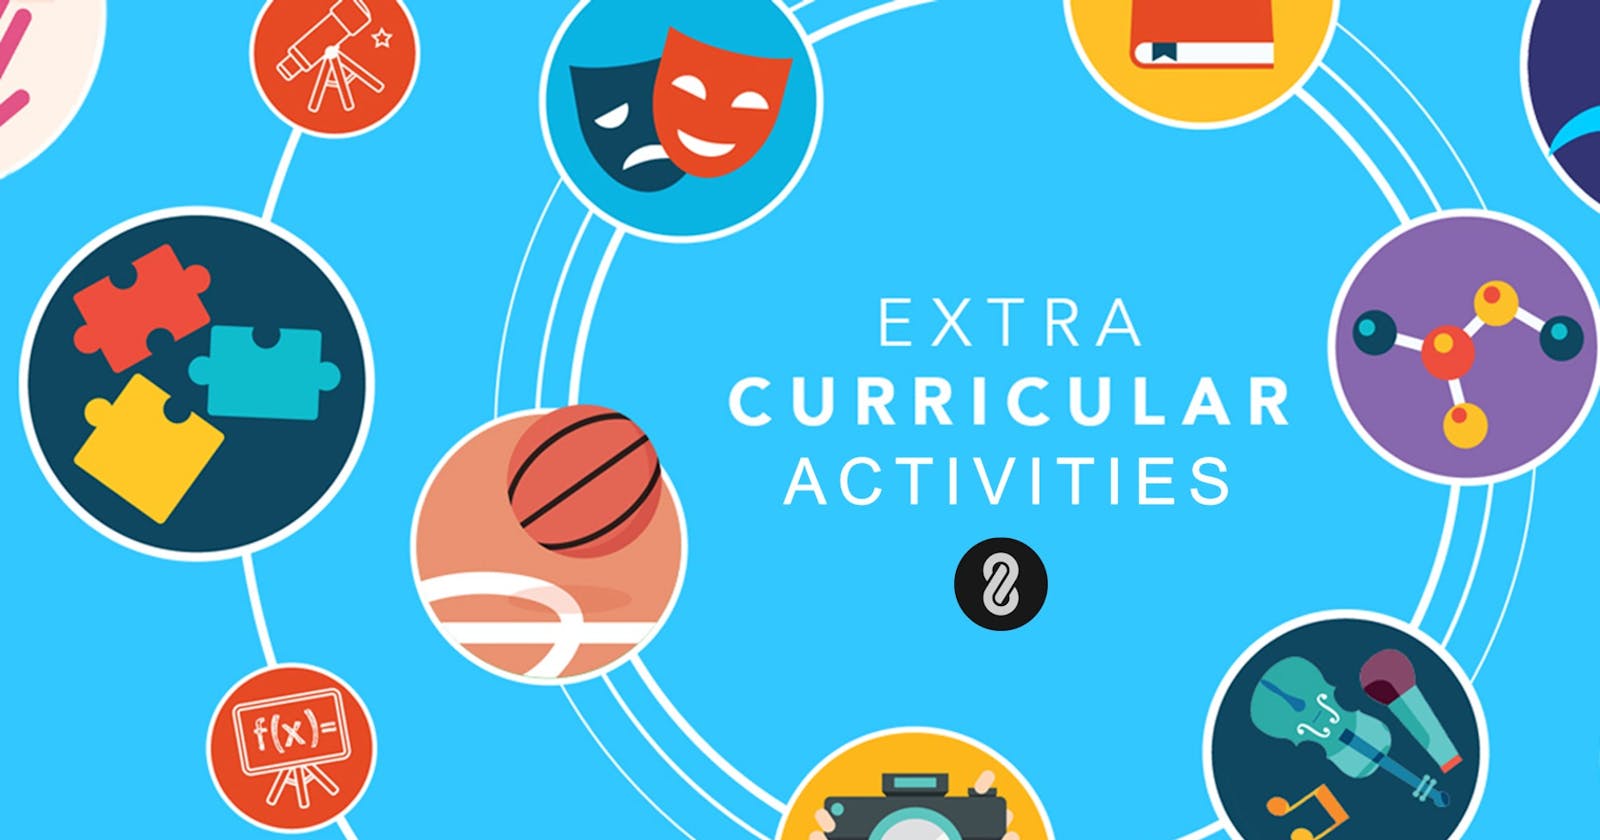 Importance of Extracurricular Activities